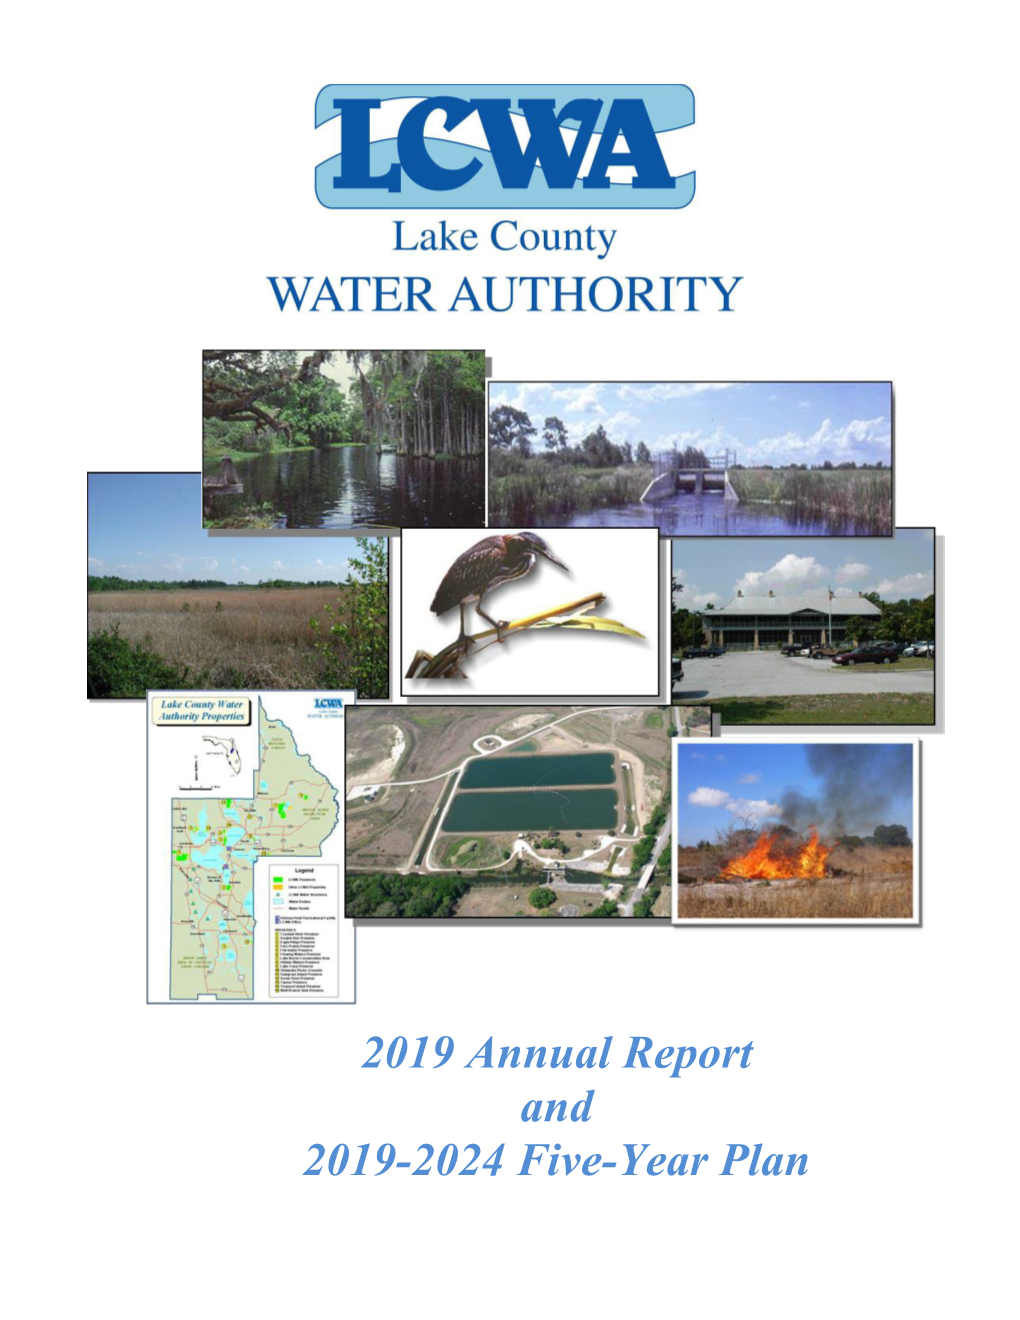 2019 Annual Report and 2019-2024 Five-Year Plan